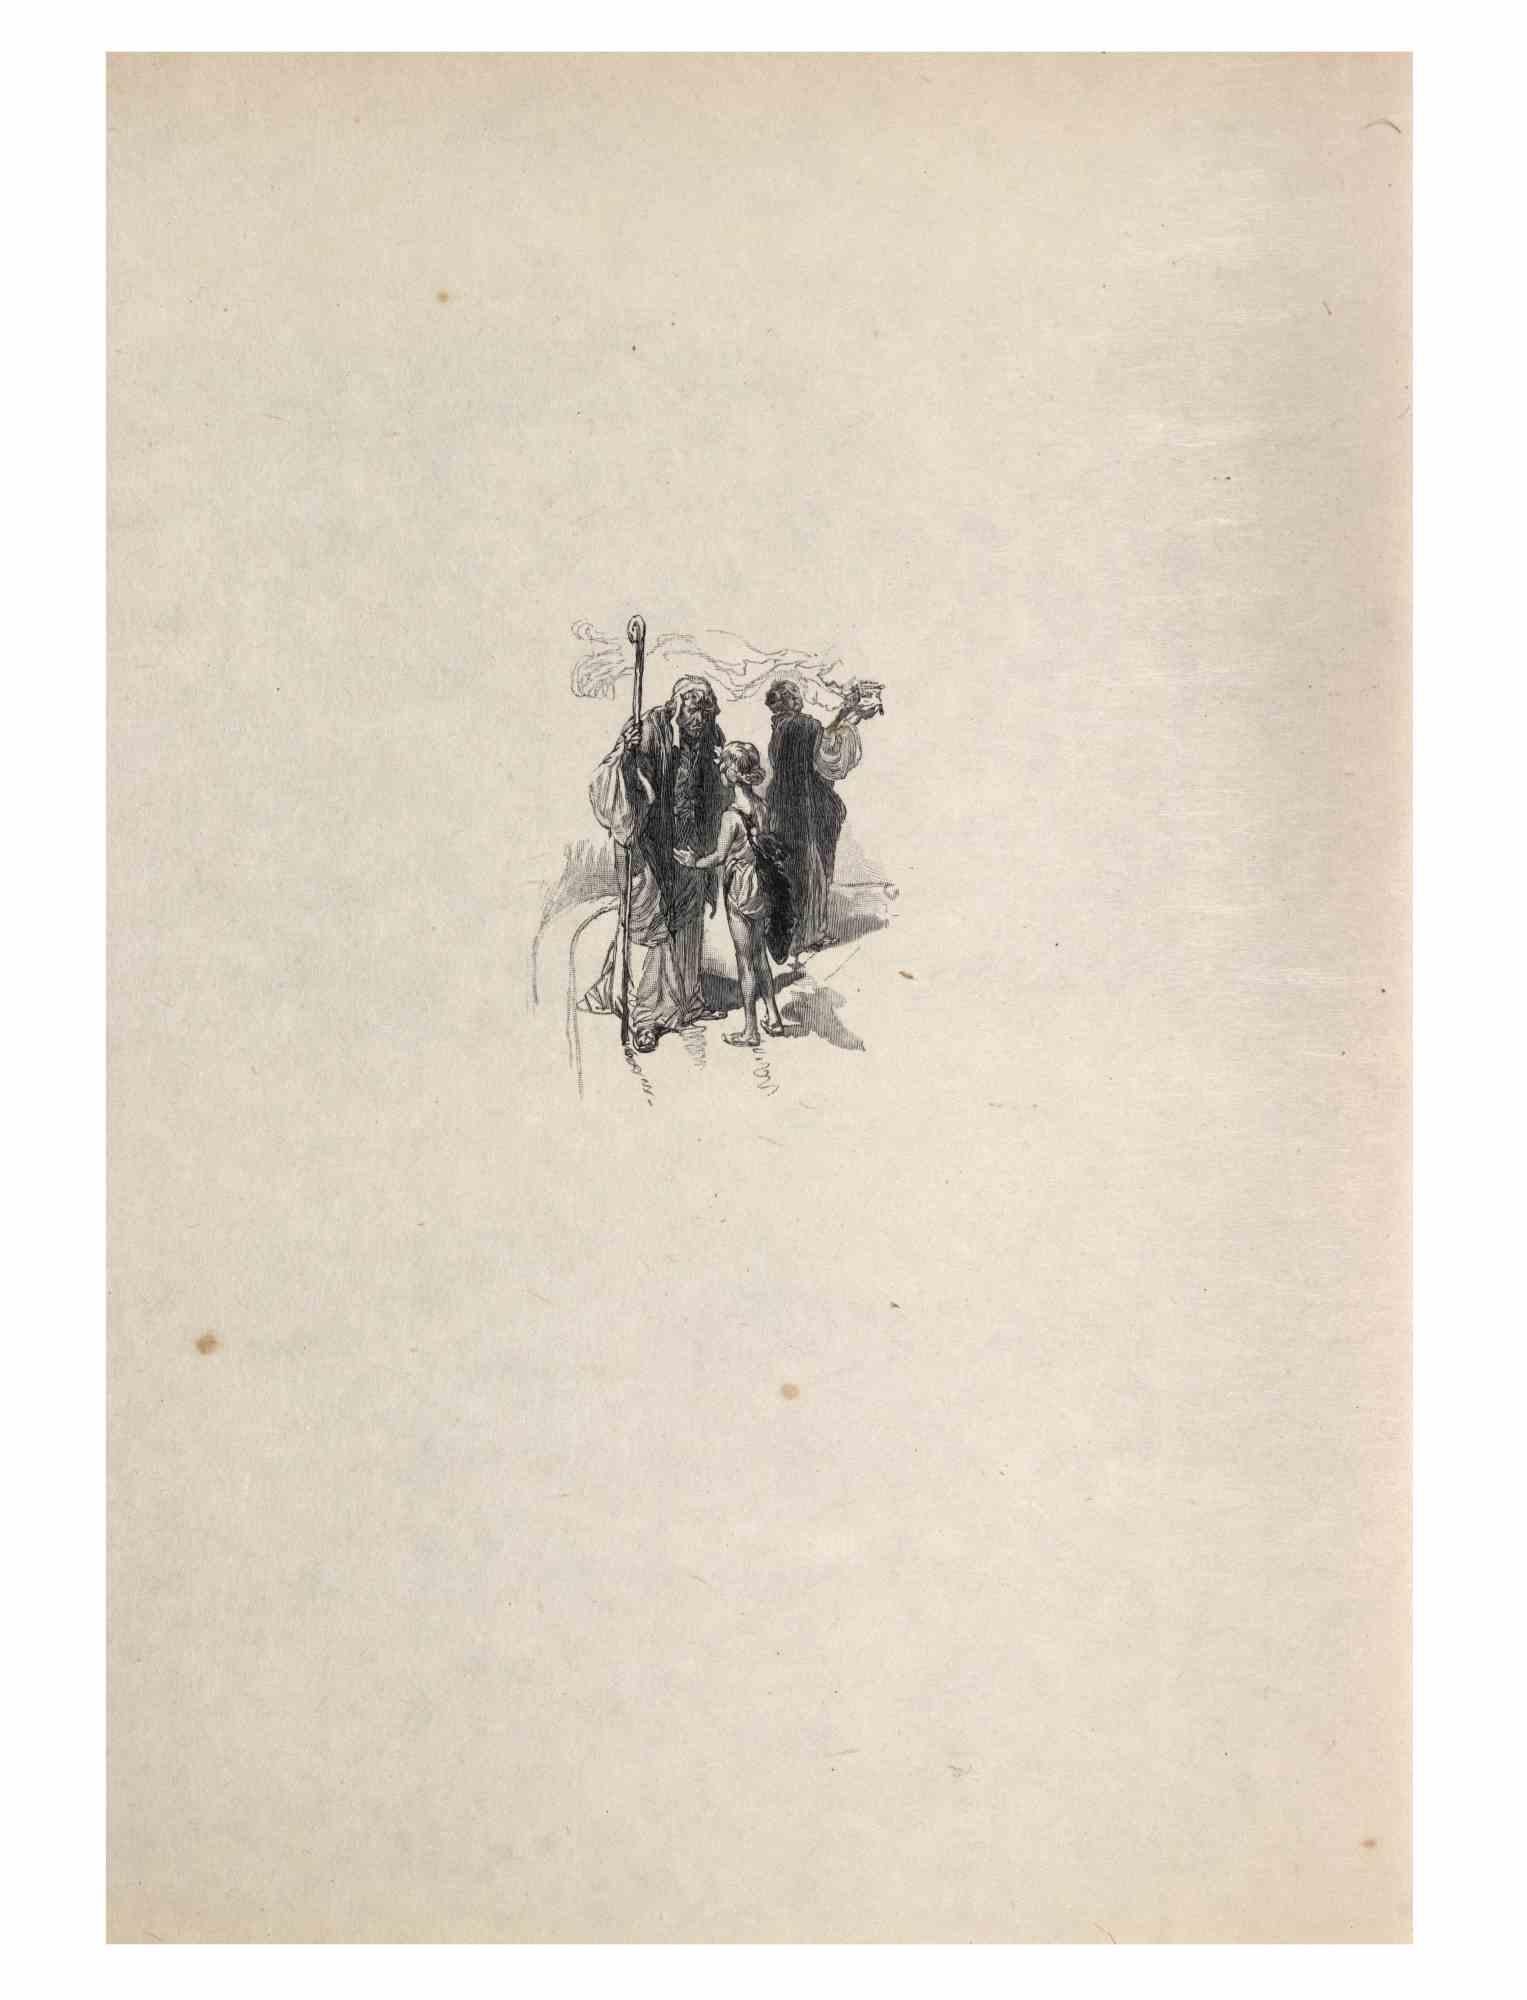 Petits Contes à ma Sœur is a Lithograph on paper realized by Hégésippe Moreau in 1838.

The artwork is in good condition.

Hégésippe Moreau (1810-1838) was a French lyric poet. The romantic myth was solidified by the publication of his complete